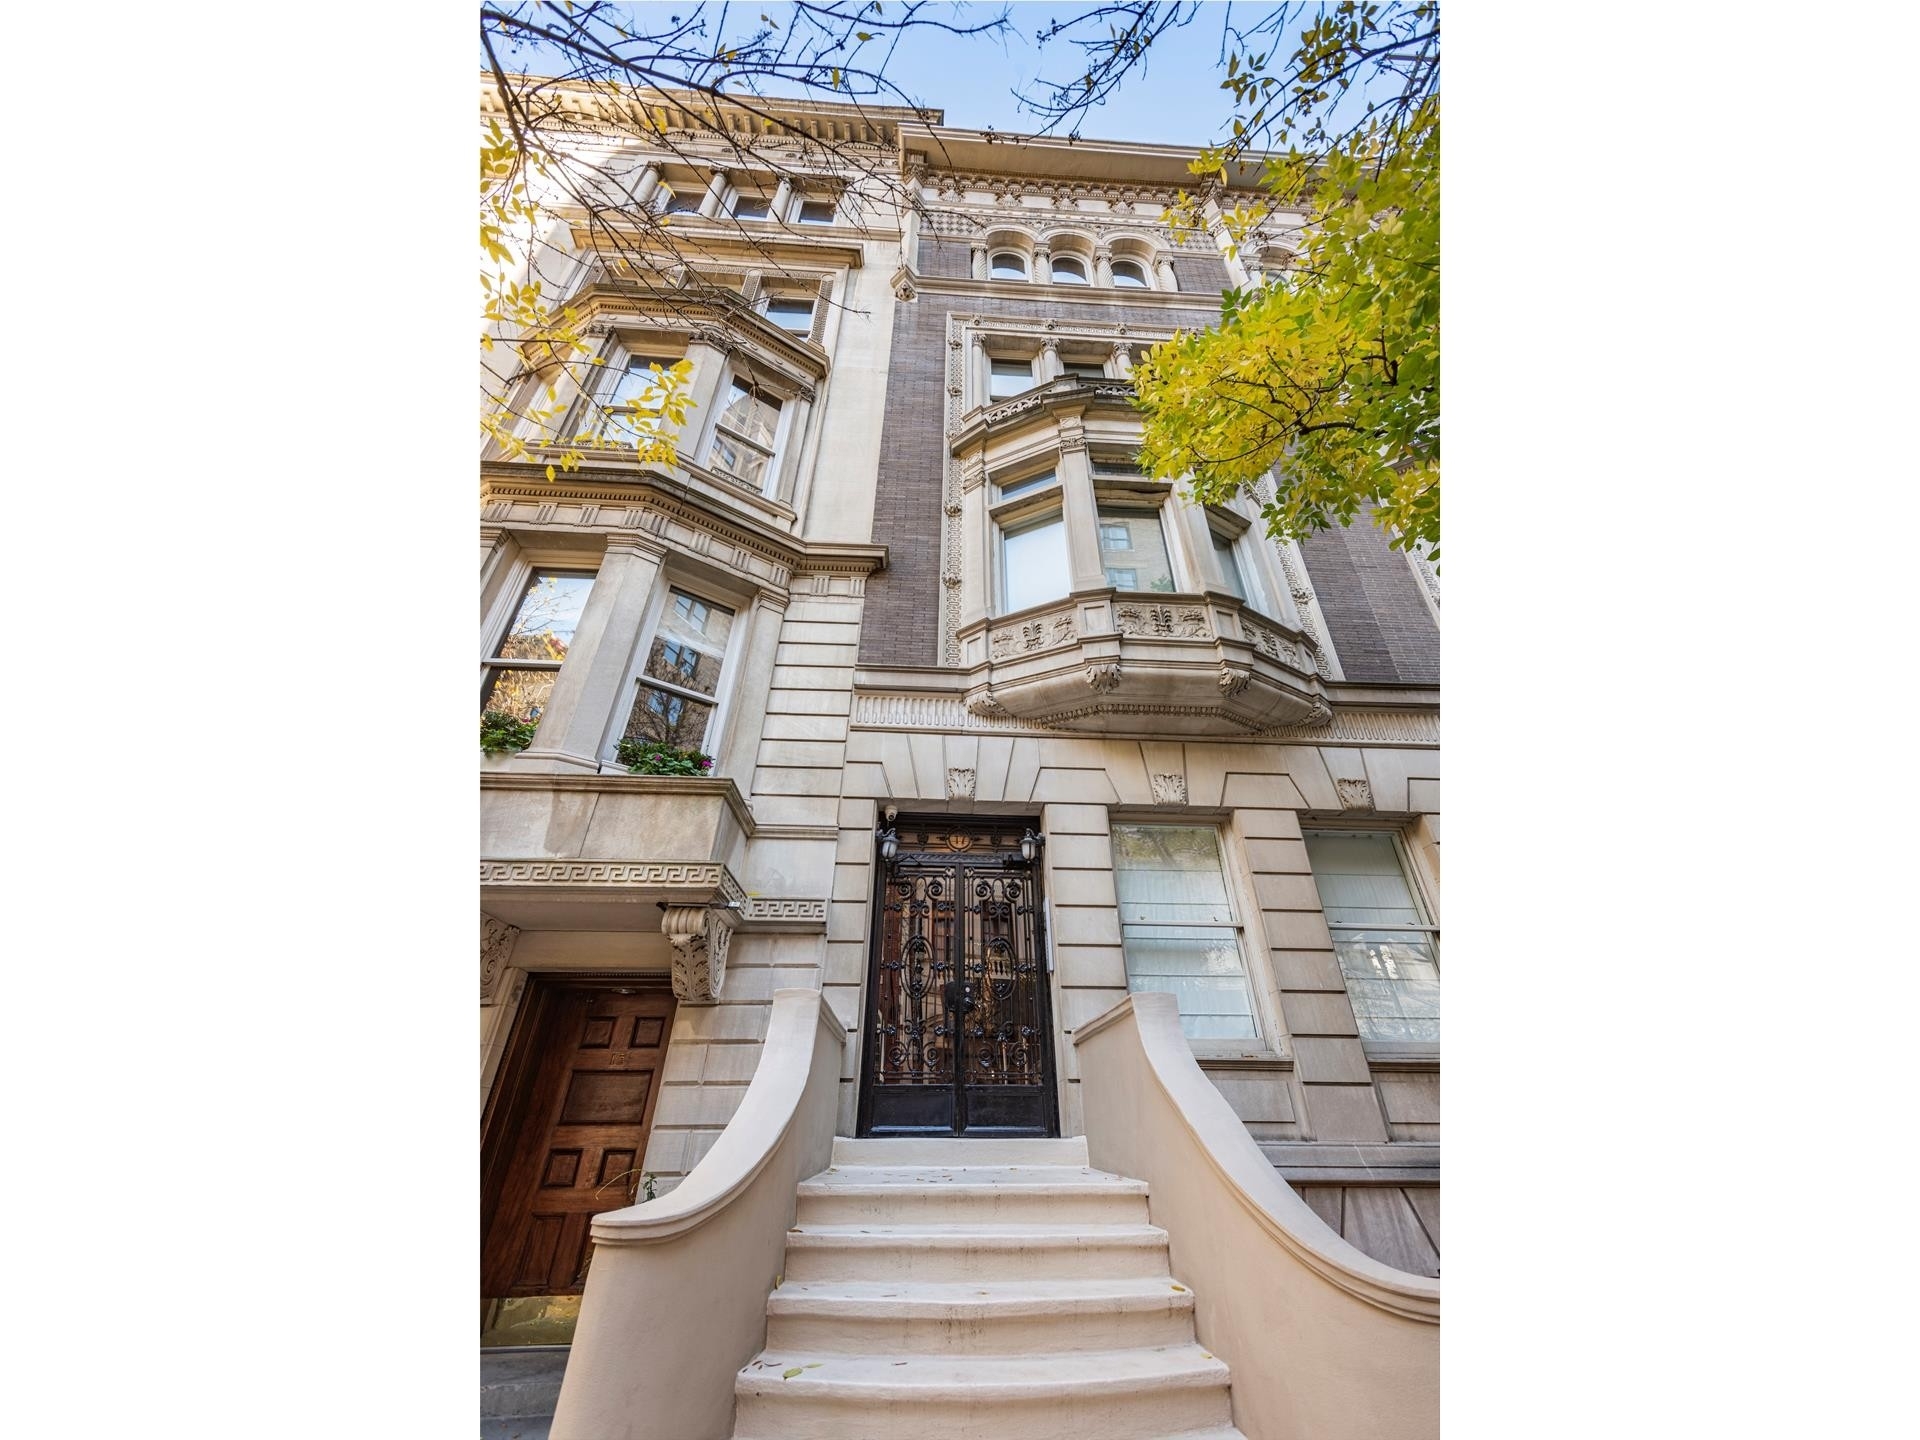 2. Multi Family Townhouse for Sale at 17 E 76TH ST, TOWNHOUSE Lenox Hill, New York, NY 10021